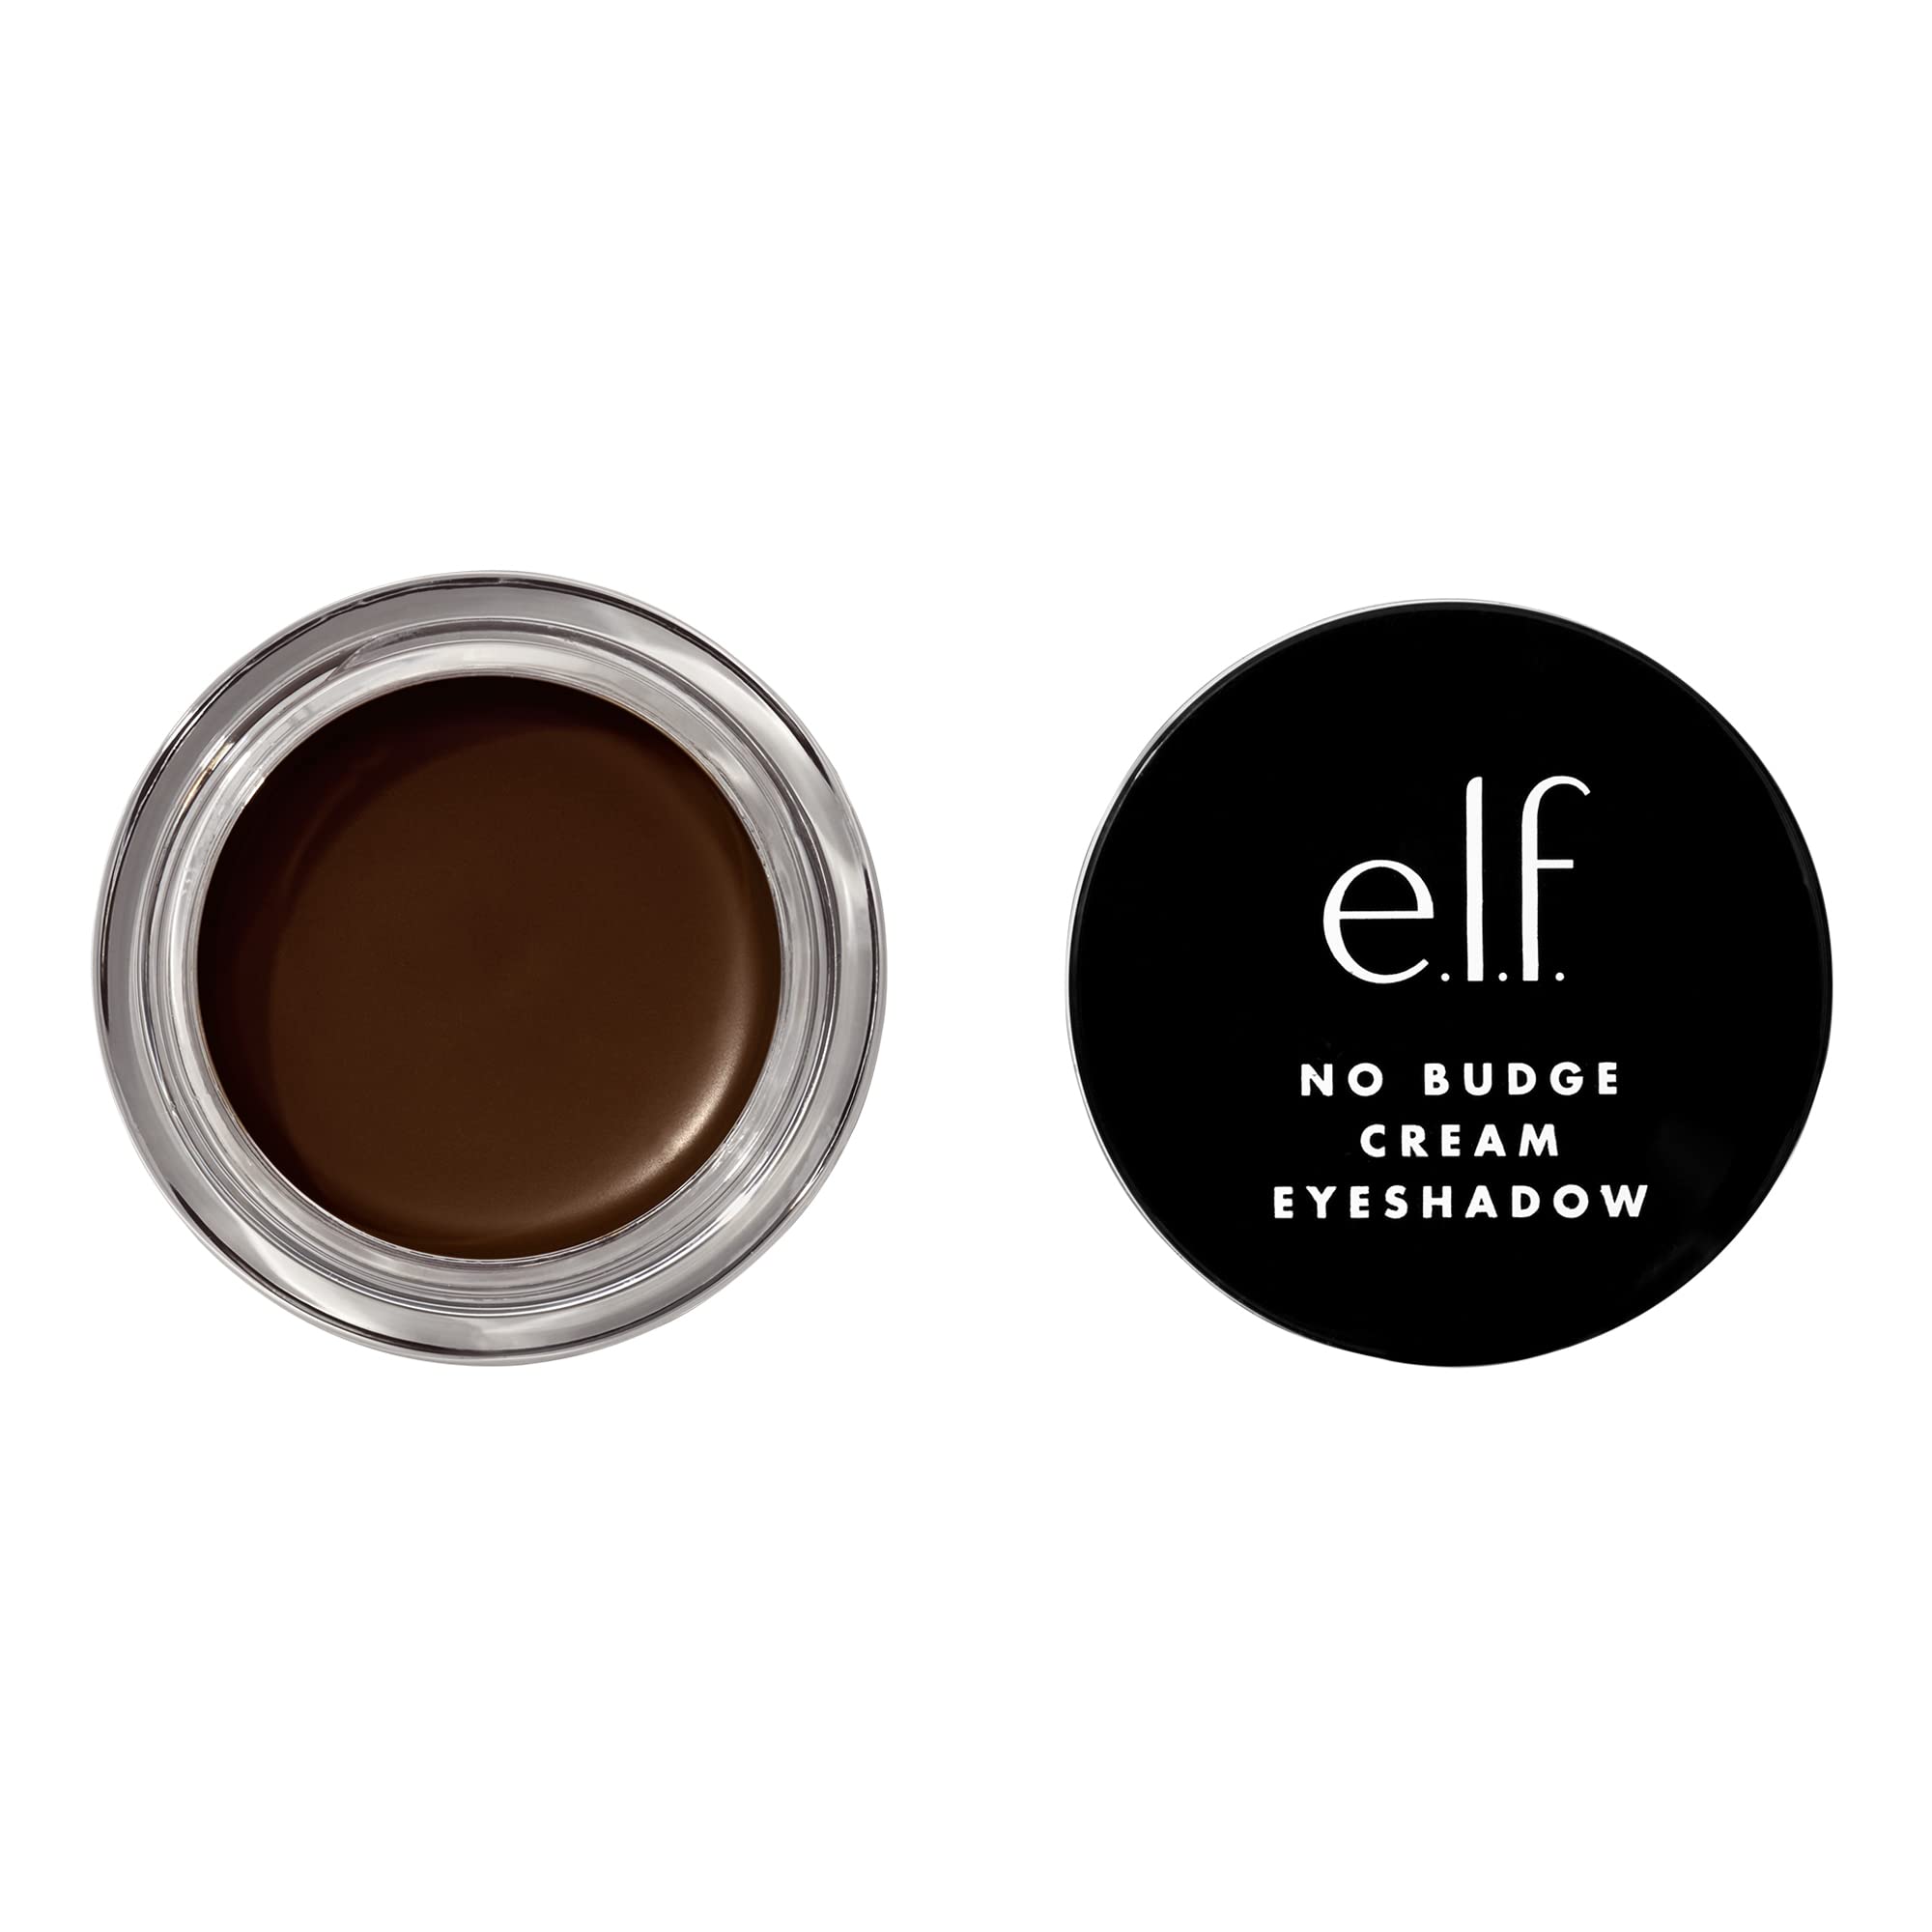 e.l.f. No Budge Cream Eyeshadow, 3-in-1 Eyeshadow, Primer & Liner With Crease-Resistant Color & Stay-Put Power, Vegan & Cruelty-Free, Plateau, 81737